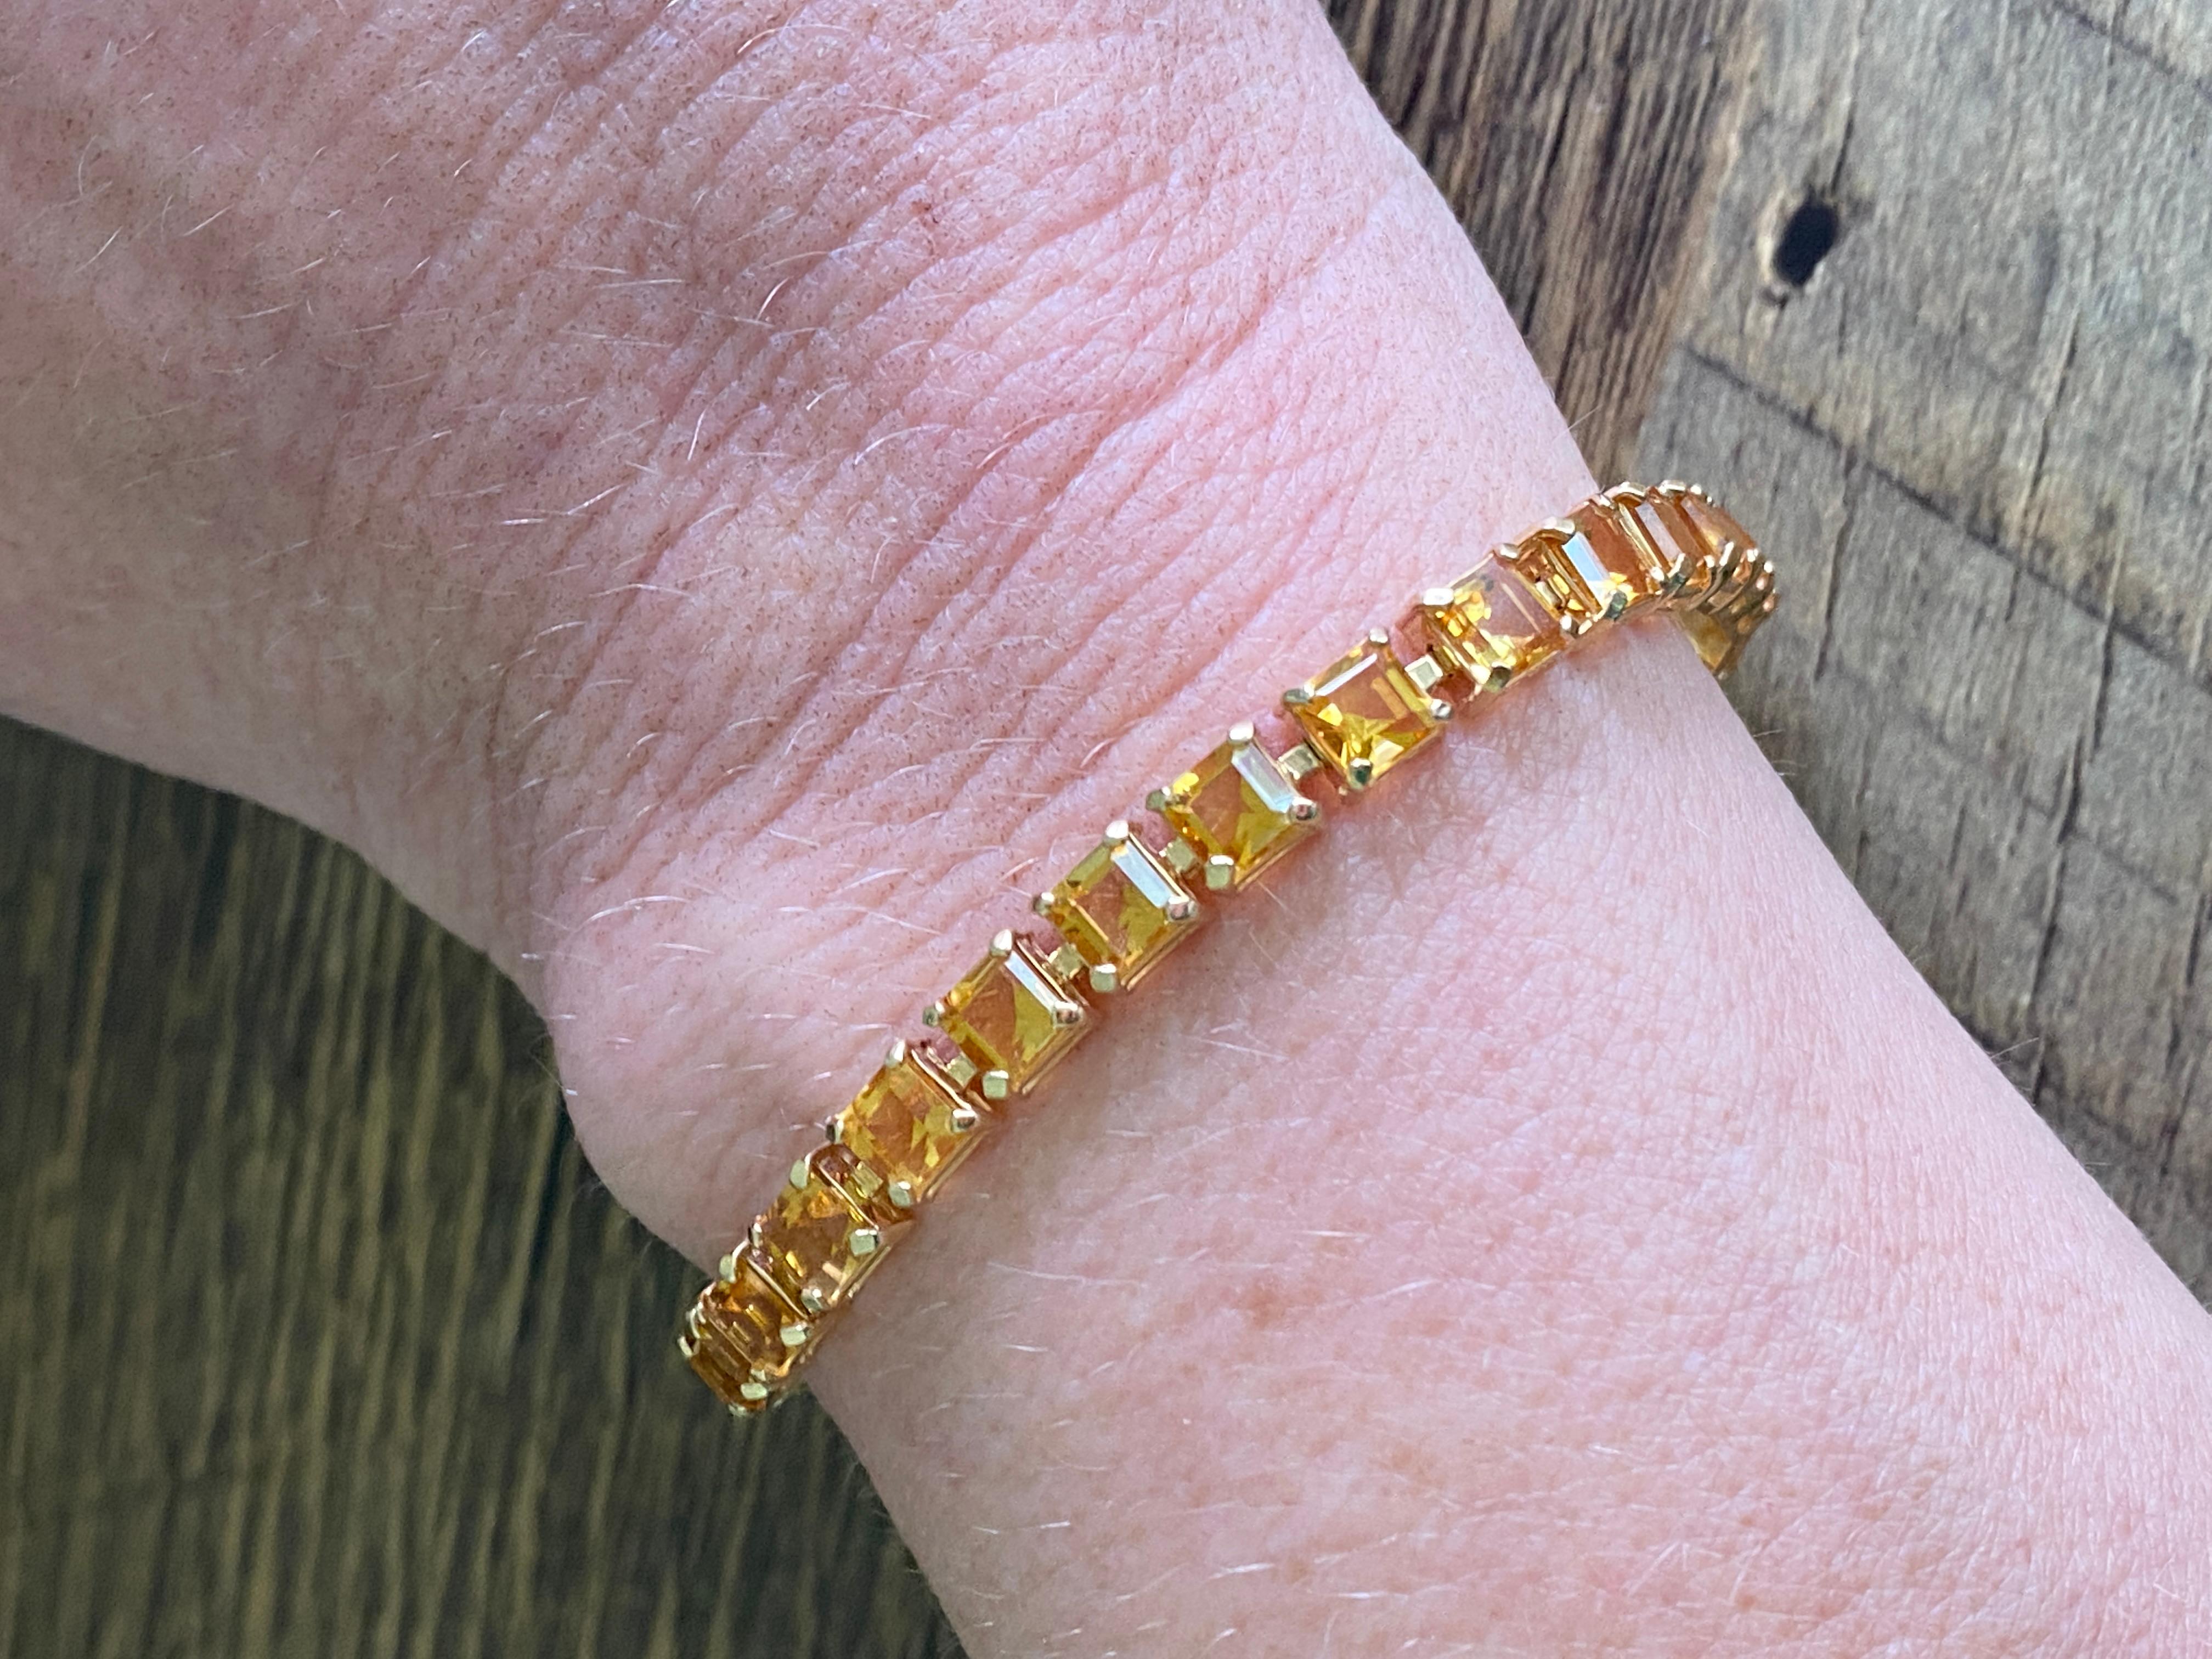  Vintage, 14k Yellow Gold, Citrine Tennis Bracelet, 8 inches total length. Lobster clasp. Great piece for layering.